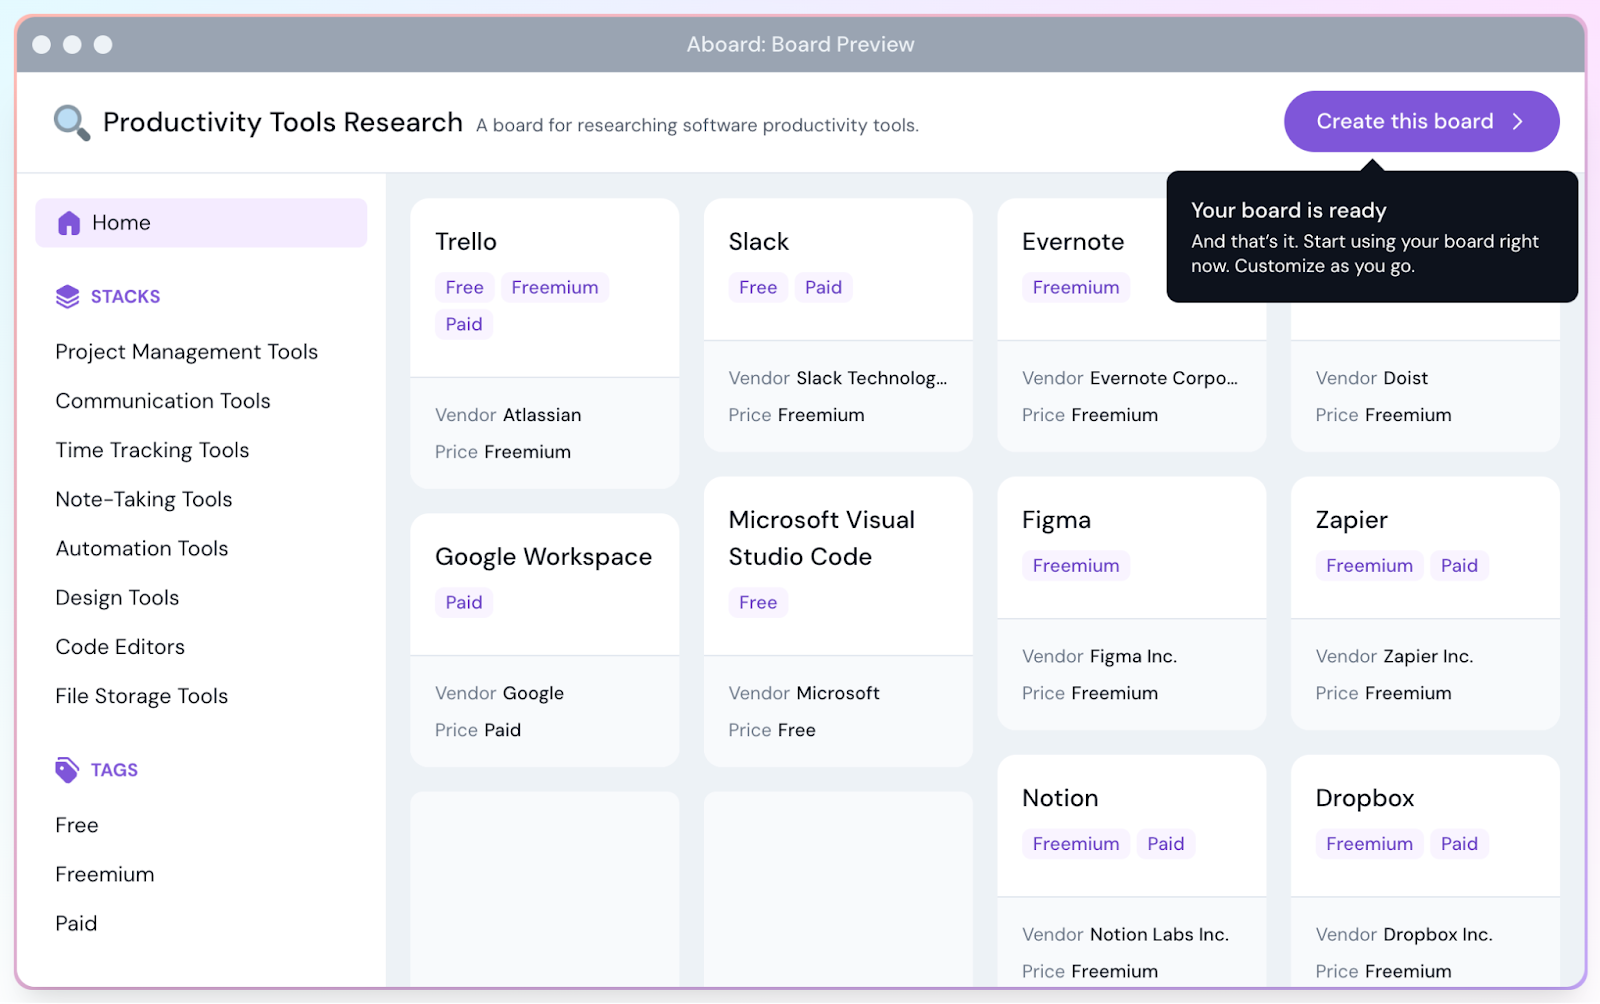 Image of a Productivity Tools Research board